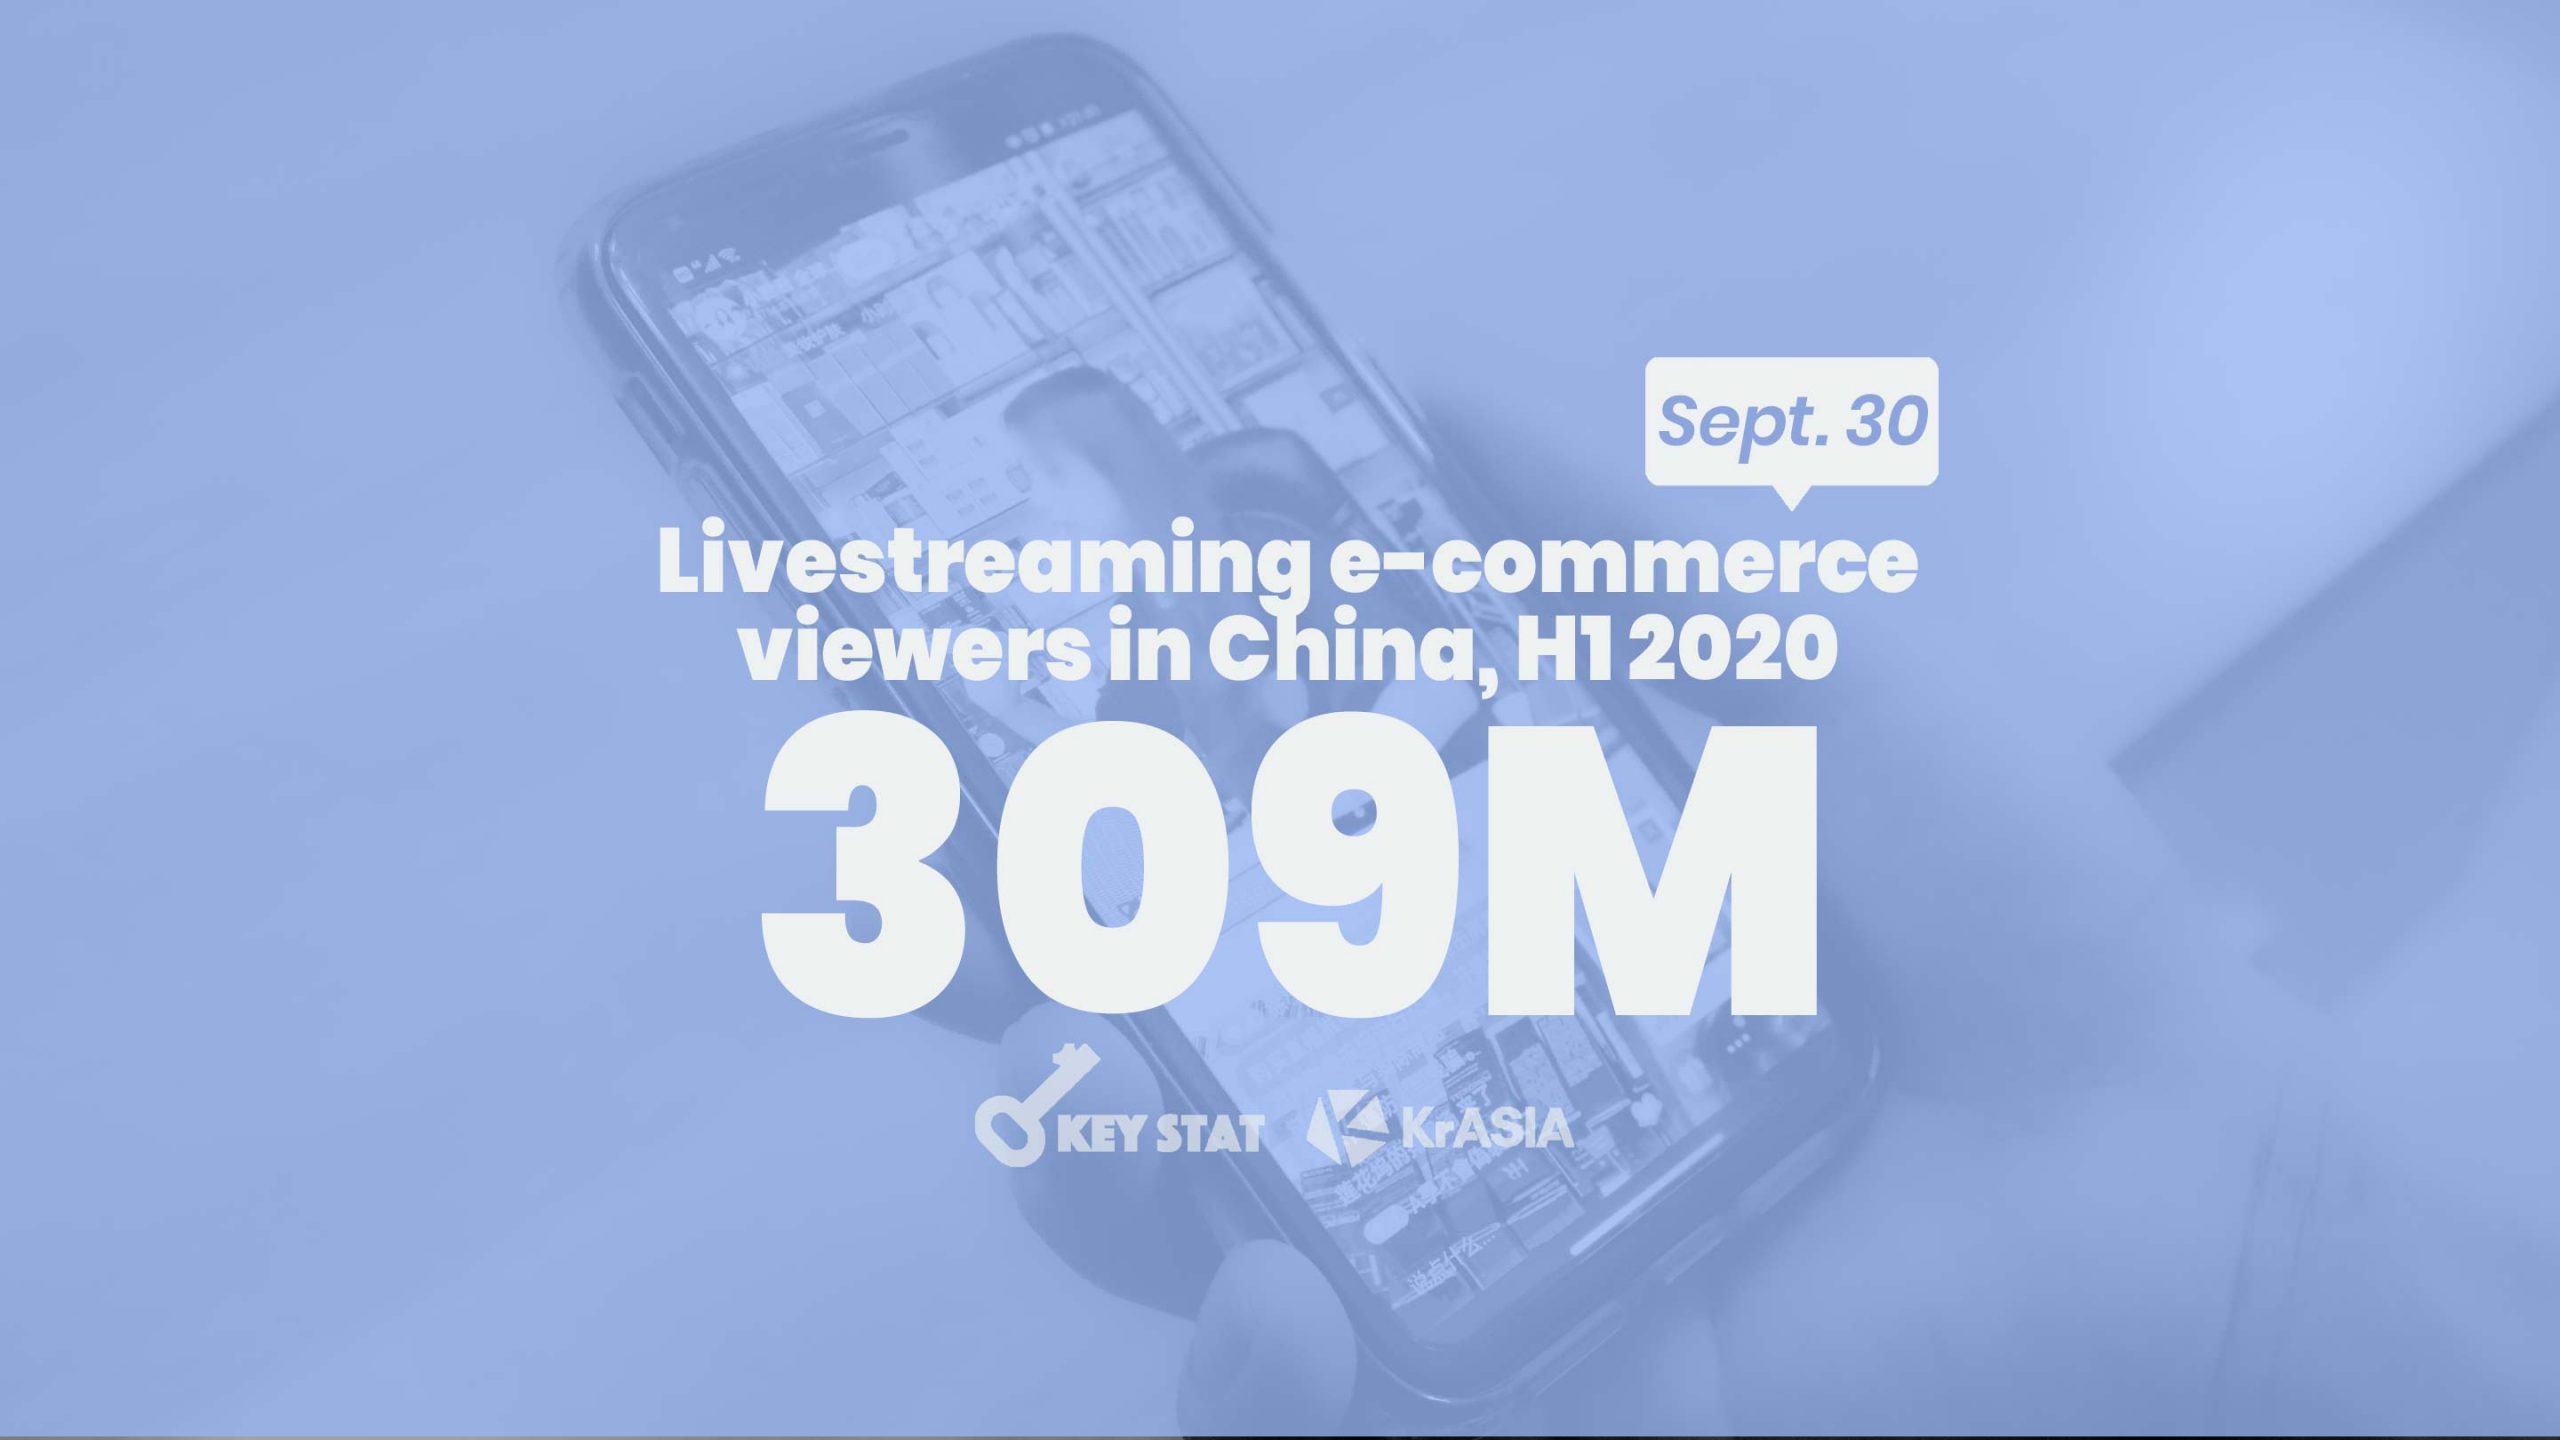 KEY STAT | Livestreaming e-commerce is the fastest growing internet sector in China